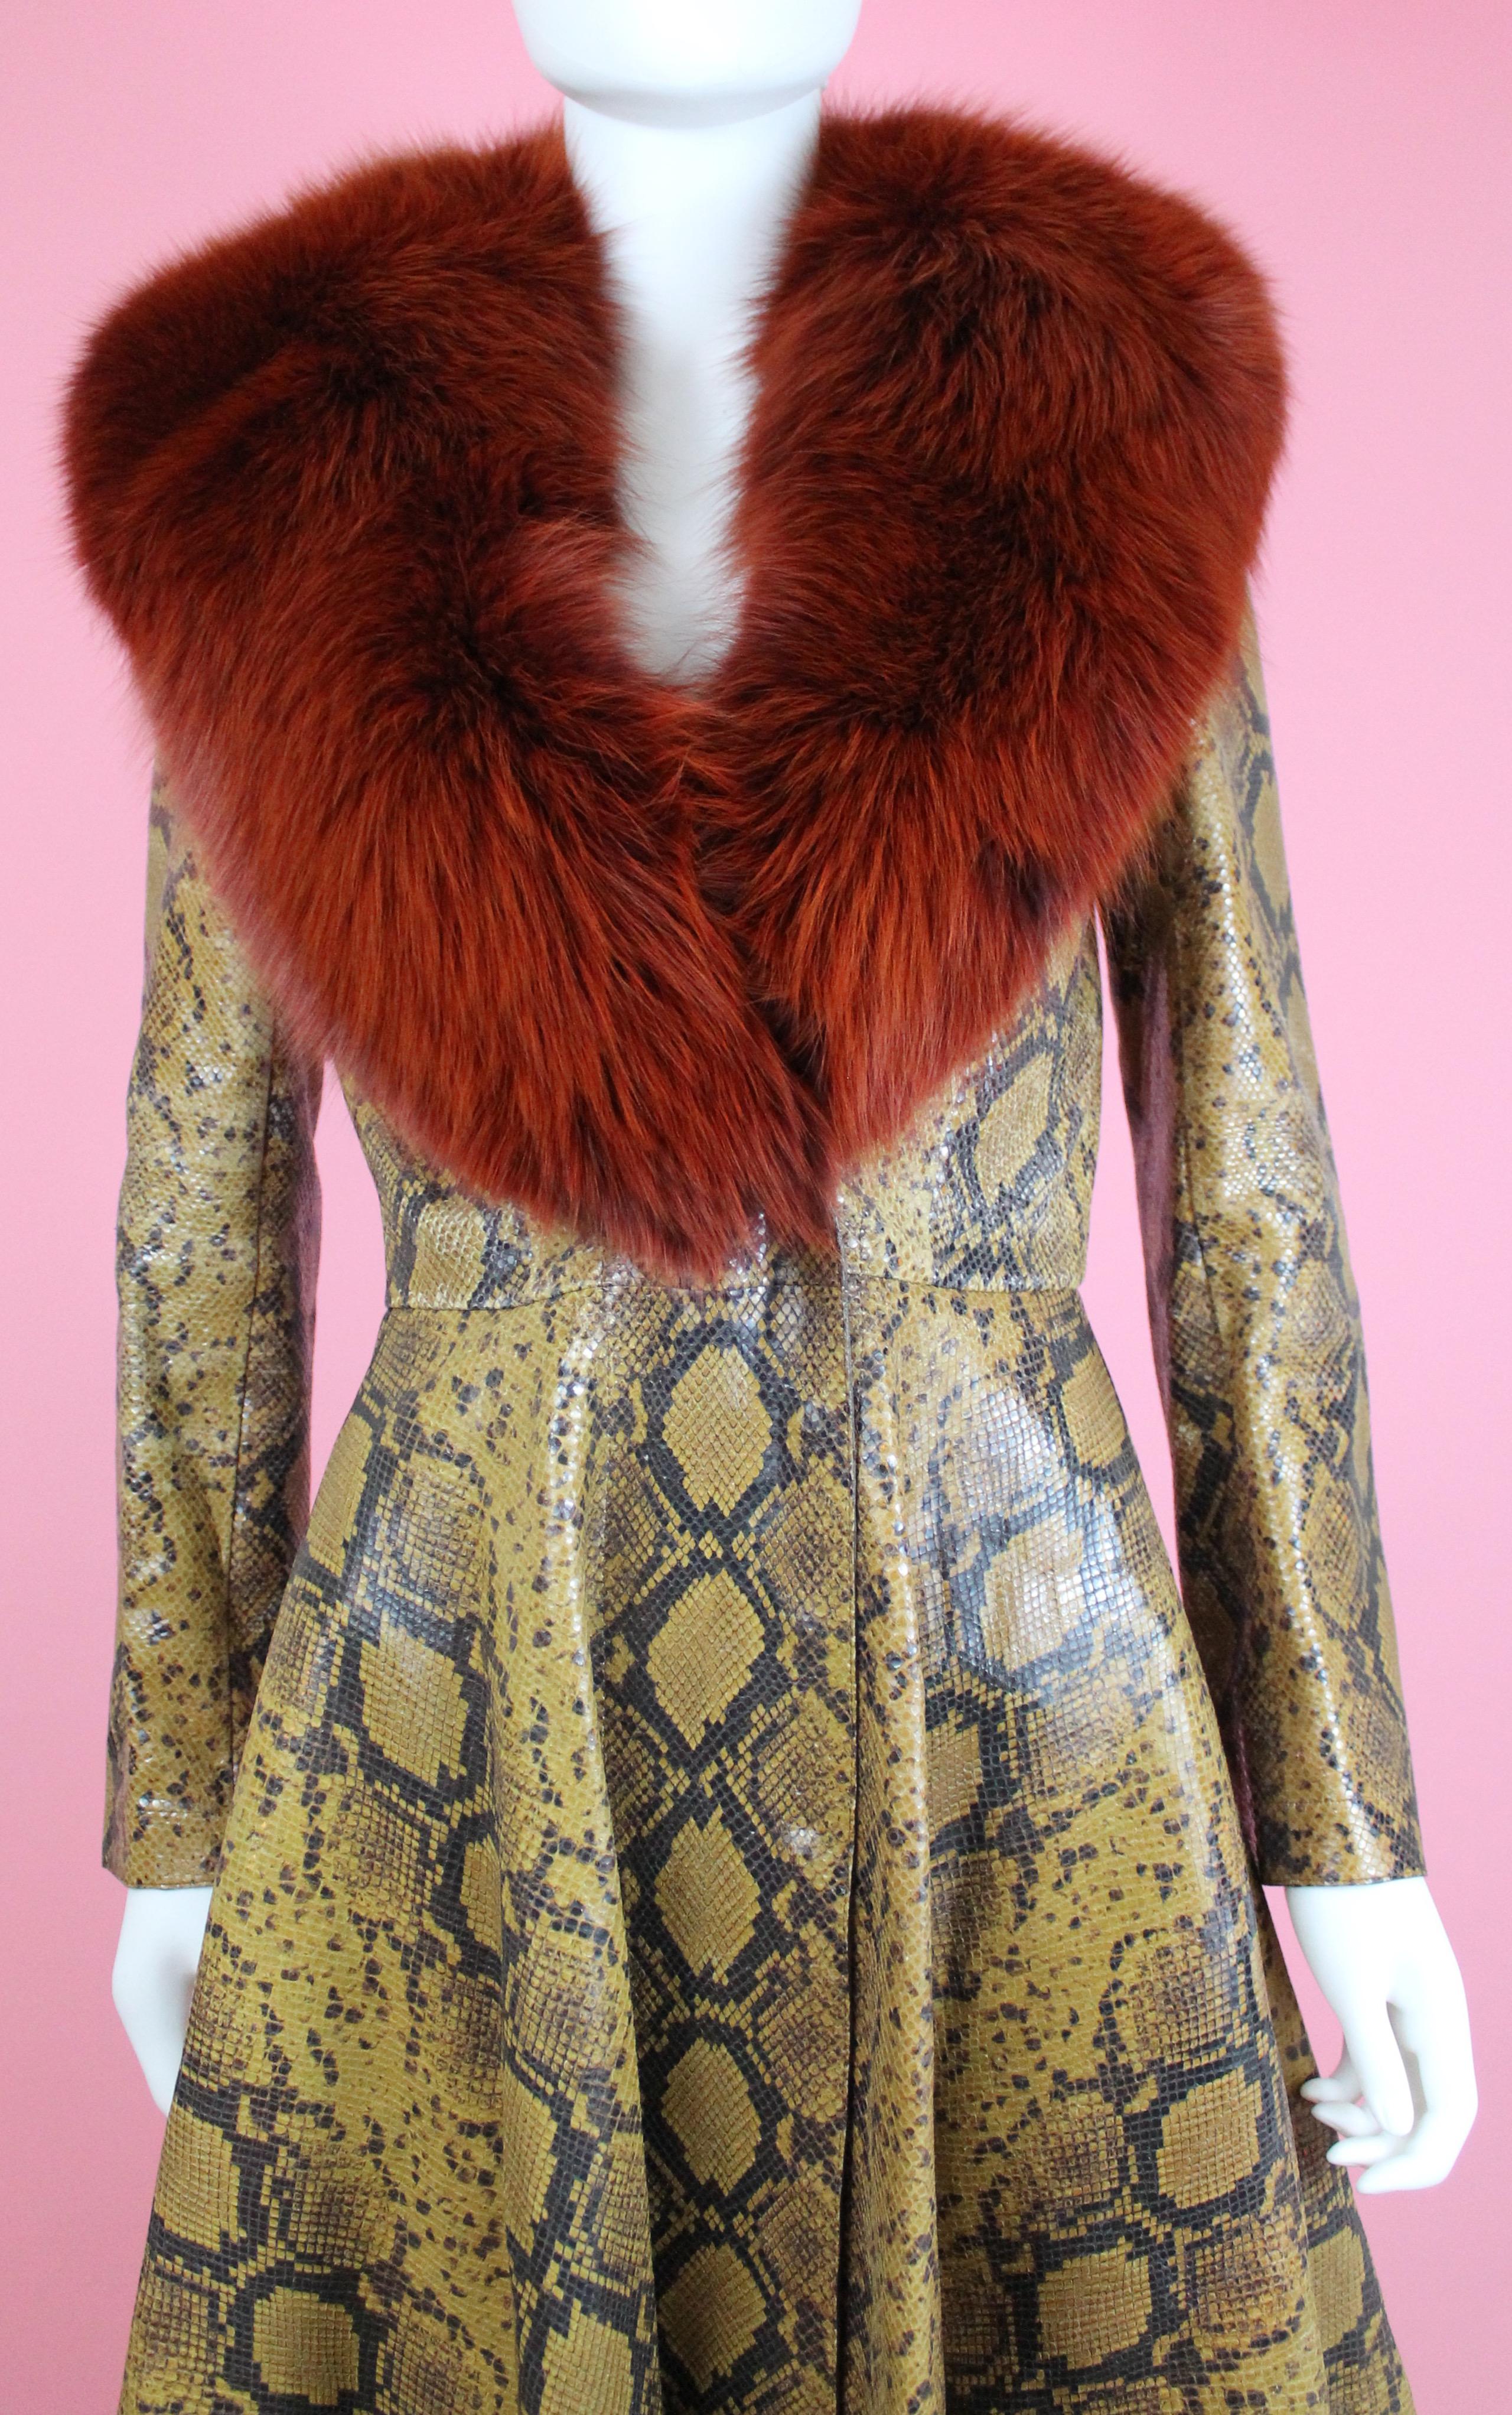 -Python embossed lamb leather with fox fur collar from Alexander McQueen Pre-AW16
-Leather feels like actual python, fur collar is supple
-Cinched at the waist
-Sized US 2 / IT 38 
-Double breasted, snap closures
-Made in Italy

Approximate